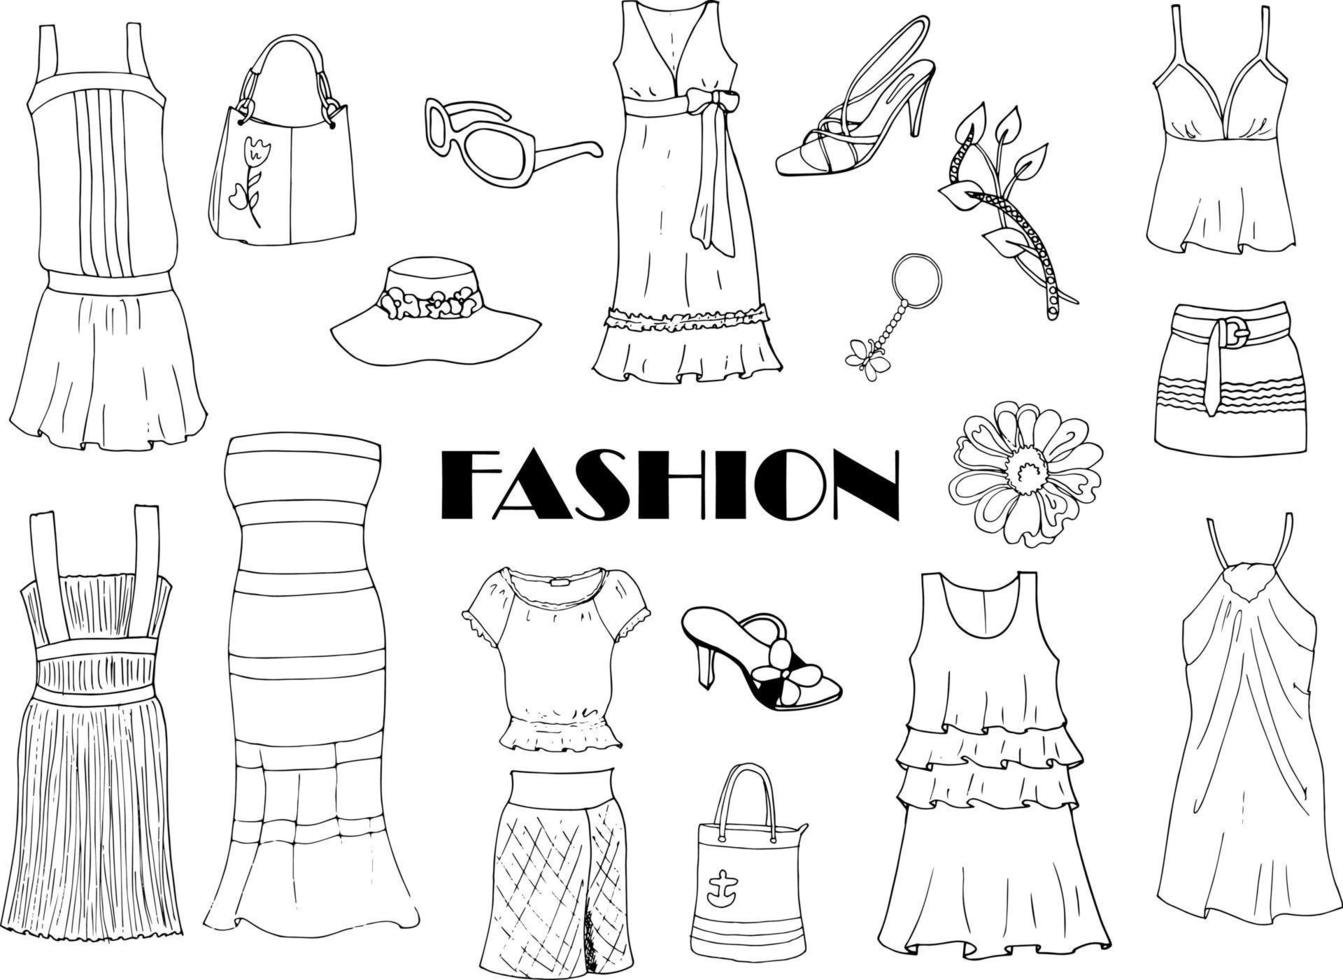 Hand drawn summer women clothes on doodle style vector